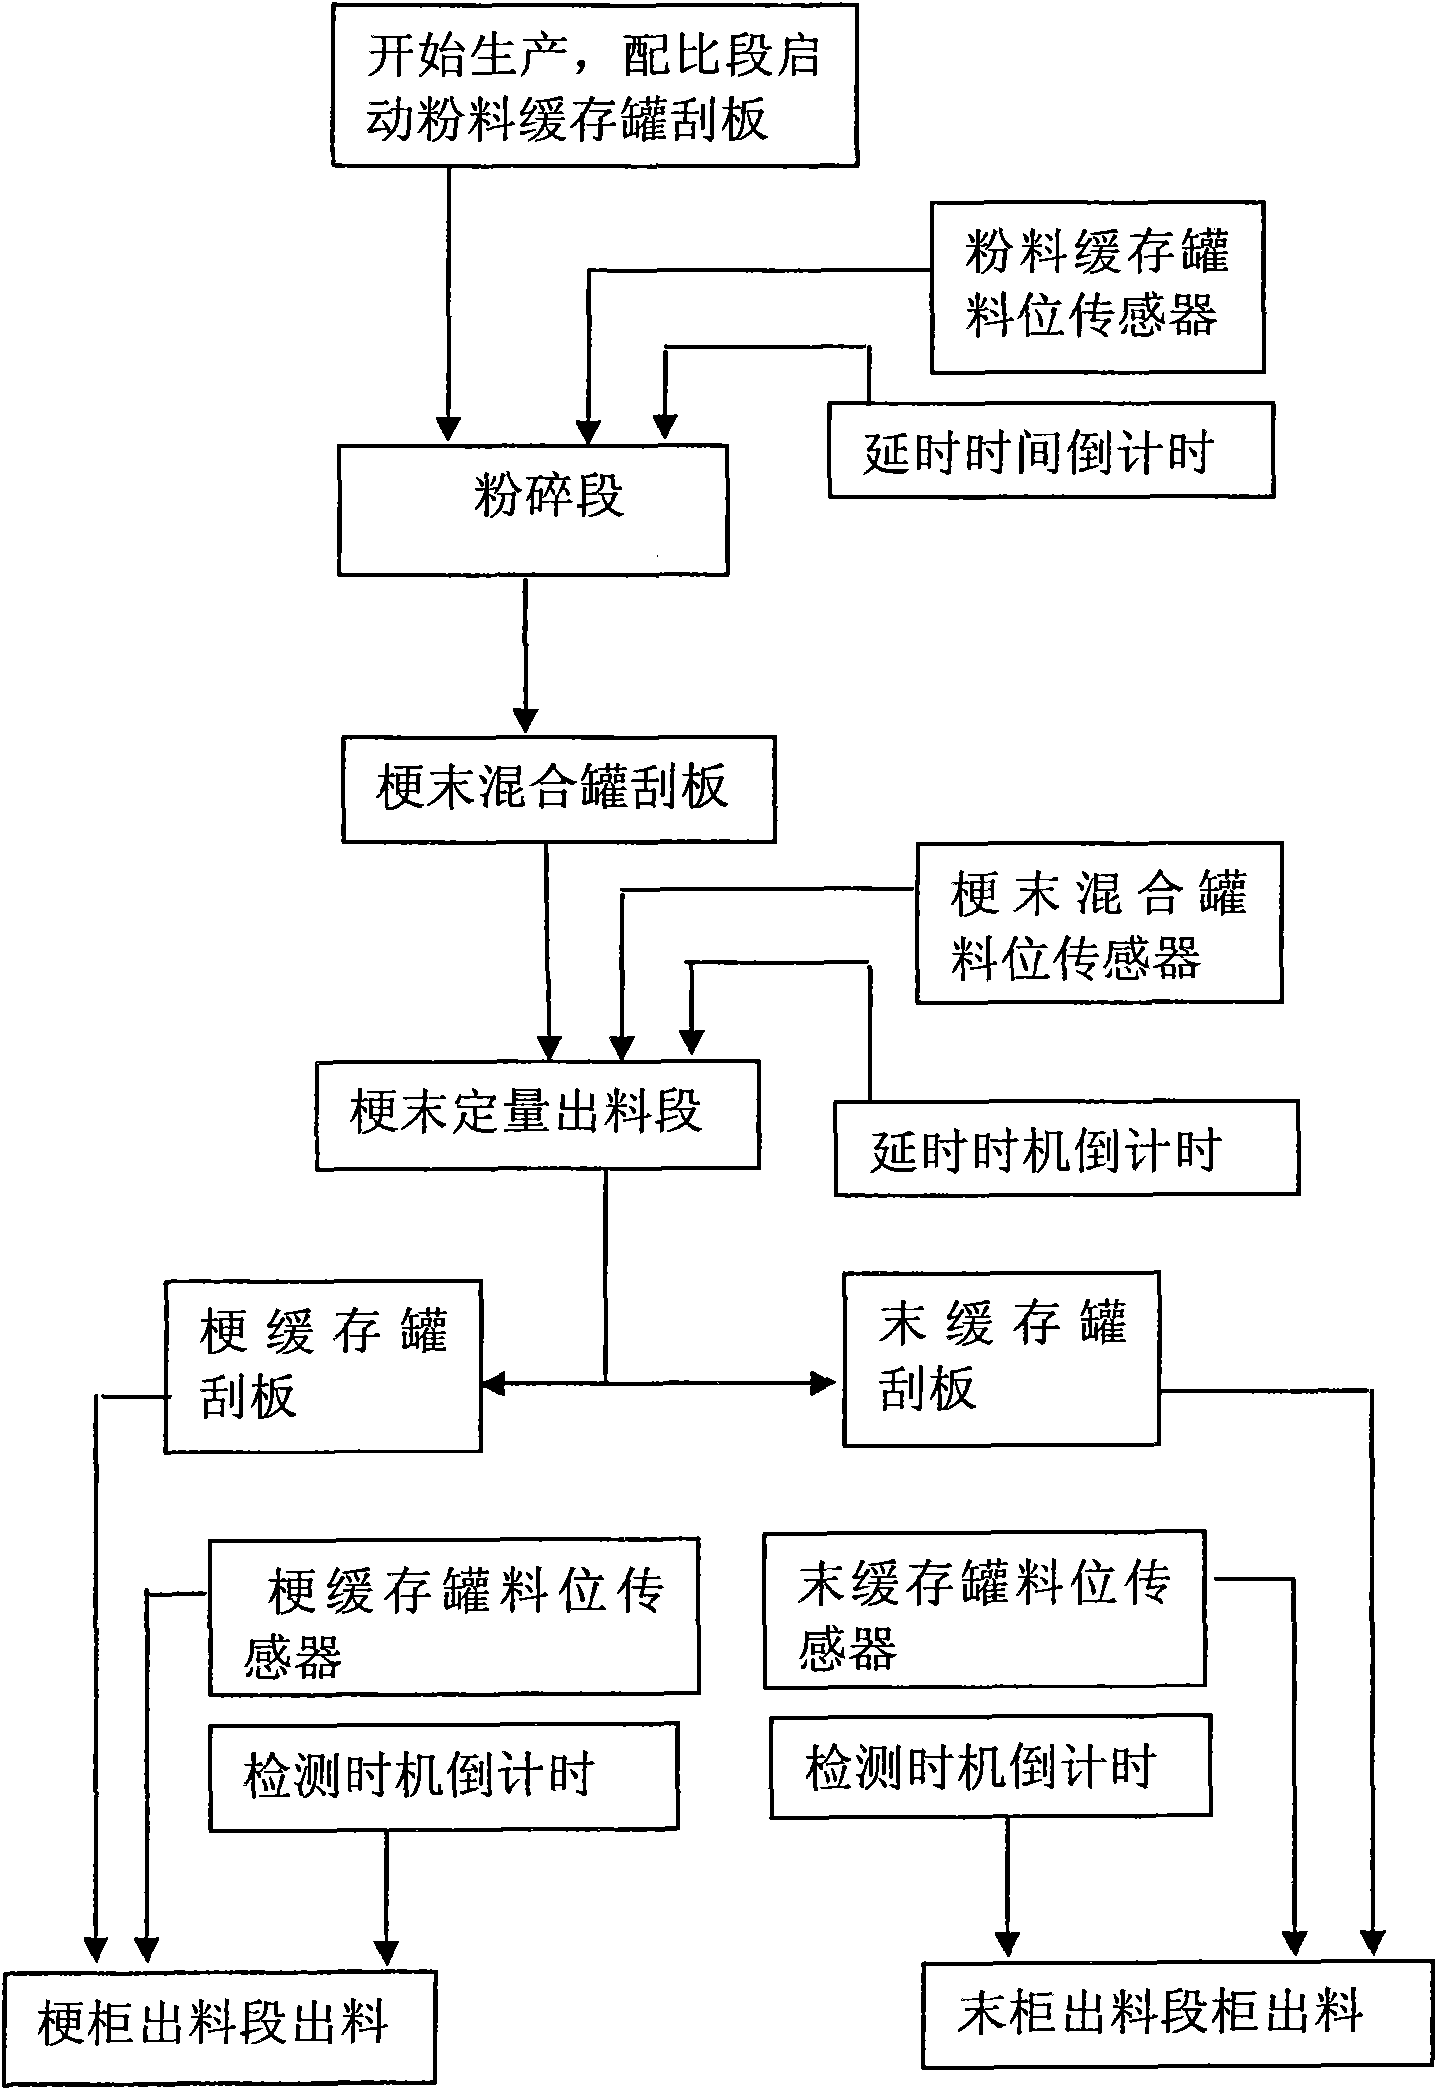 On-line raw material automatic control method of thin piece line